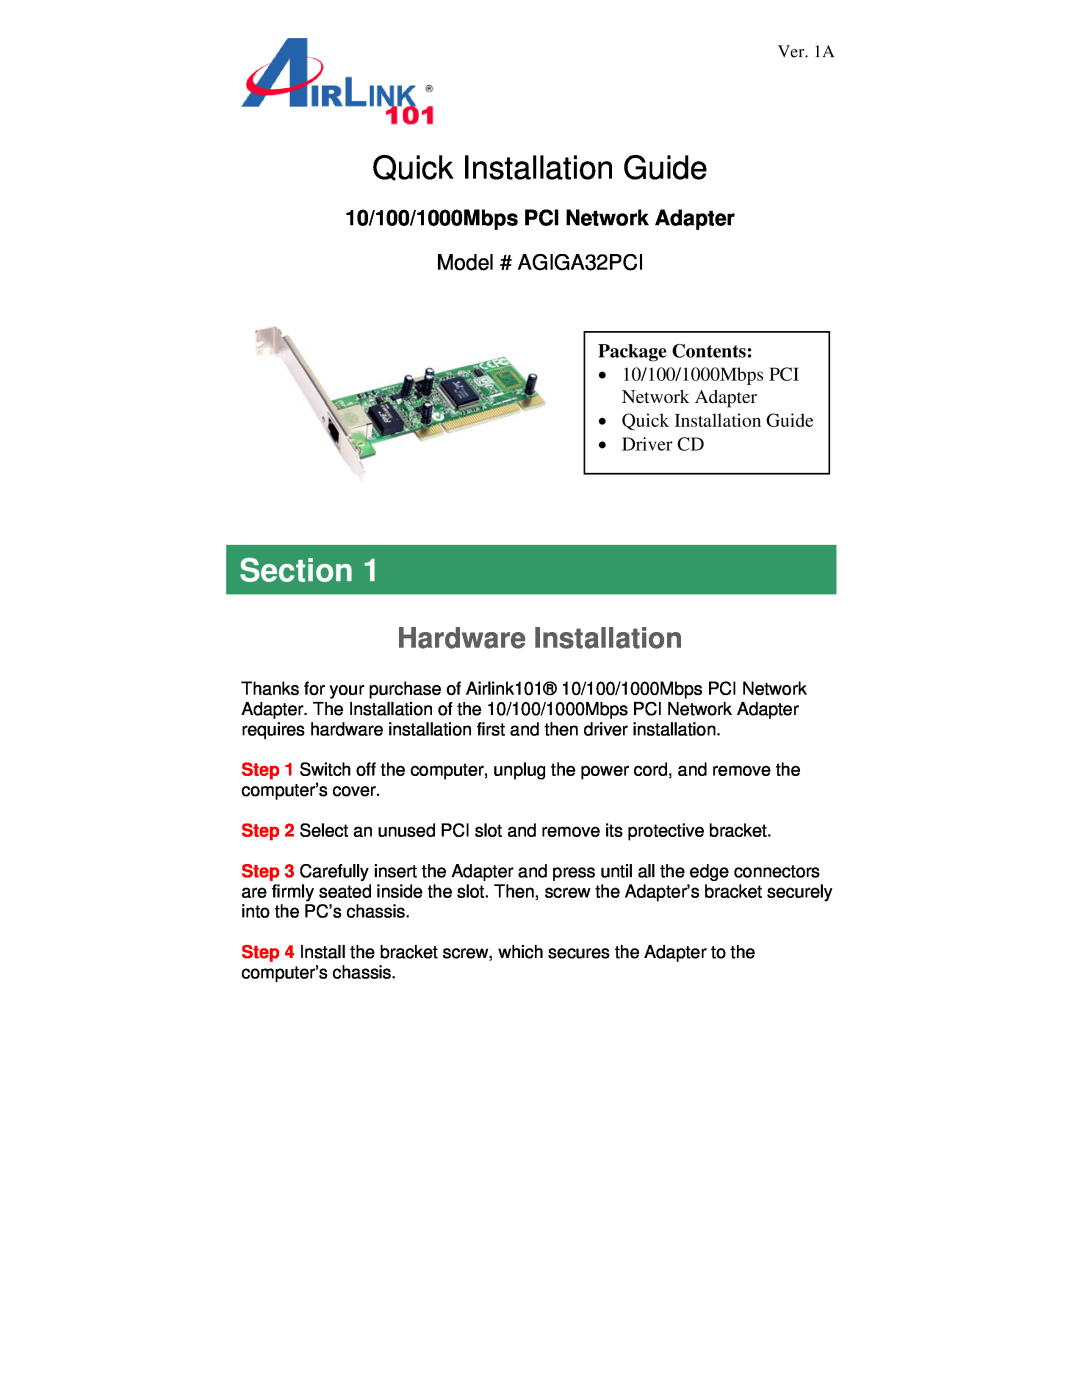 Airlink101 AGIGA32PCI manual Section, Installing Hardware, Installing Driver, 10/100/1000Mbps PCI Adapter, Package Content 